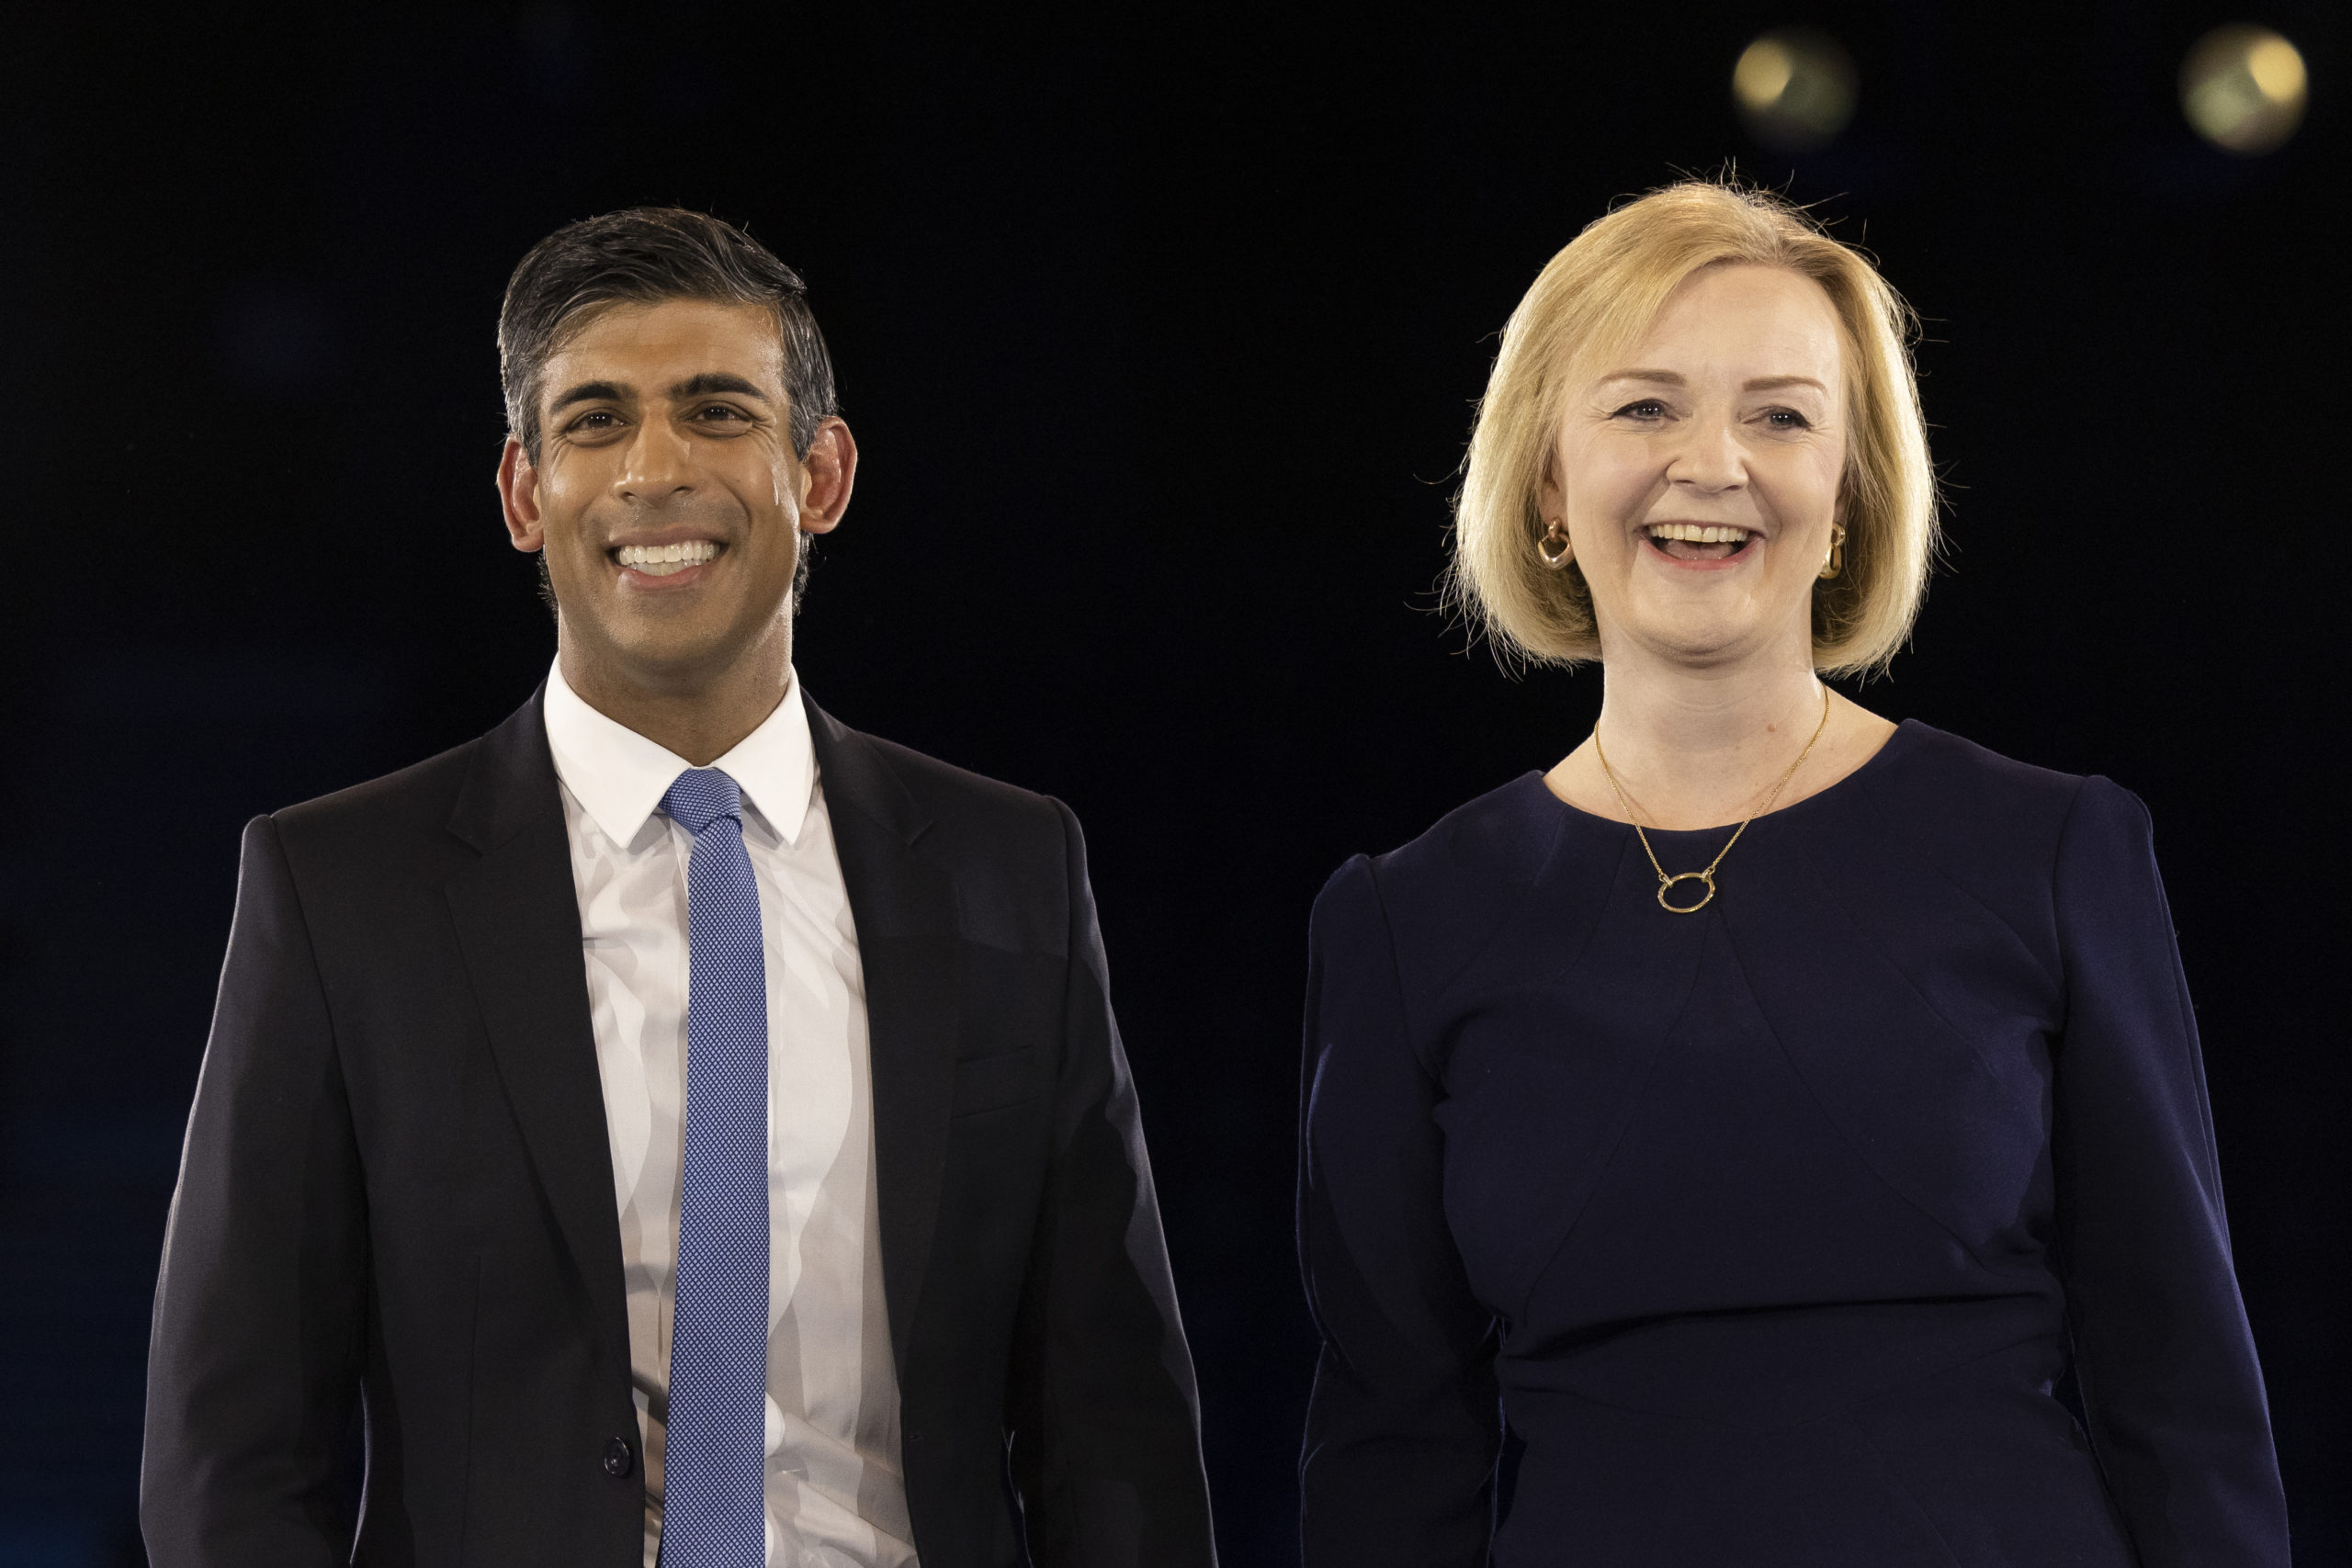 LONDON, ENGLAND - AUGUST 31: Conservative leadership hopefuls Liz Truss and Rishi Sunak appear together at the end of the final Tory leadership hustings at Wembley Arena on August 31, 2022 in London, England. (Photo by Dan Kitwood/Getty Images)